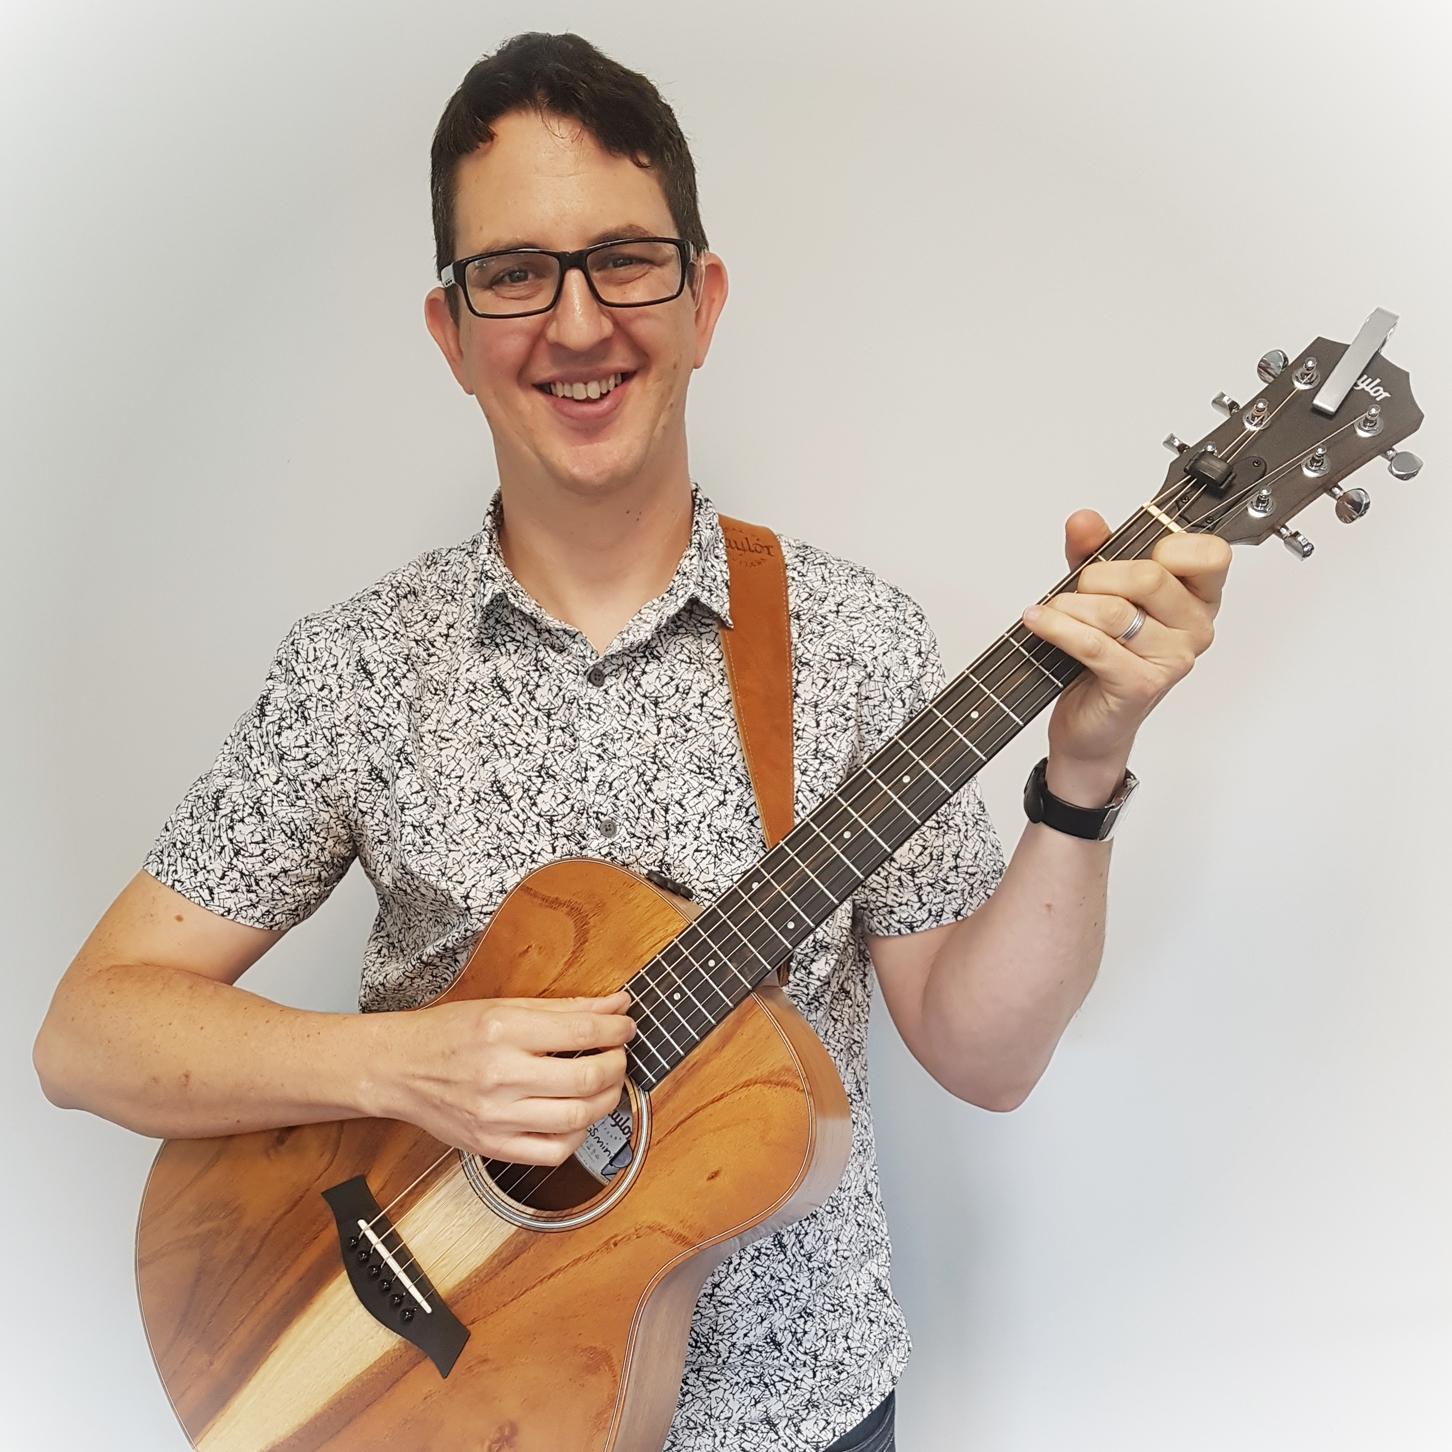 A white man with short dark hair, wearing glasses and a white and black shirt and holding a guitar